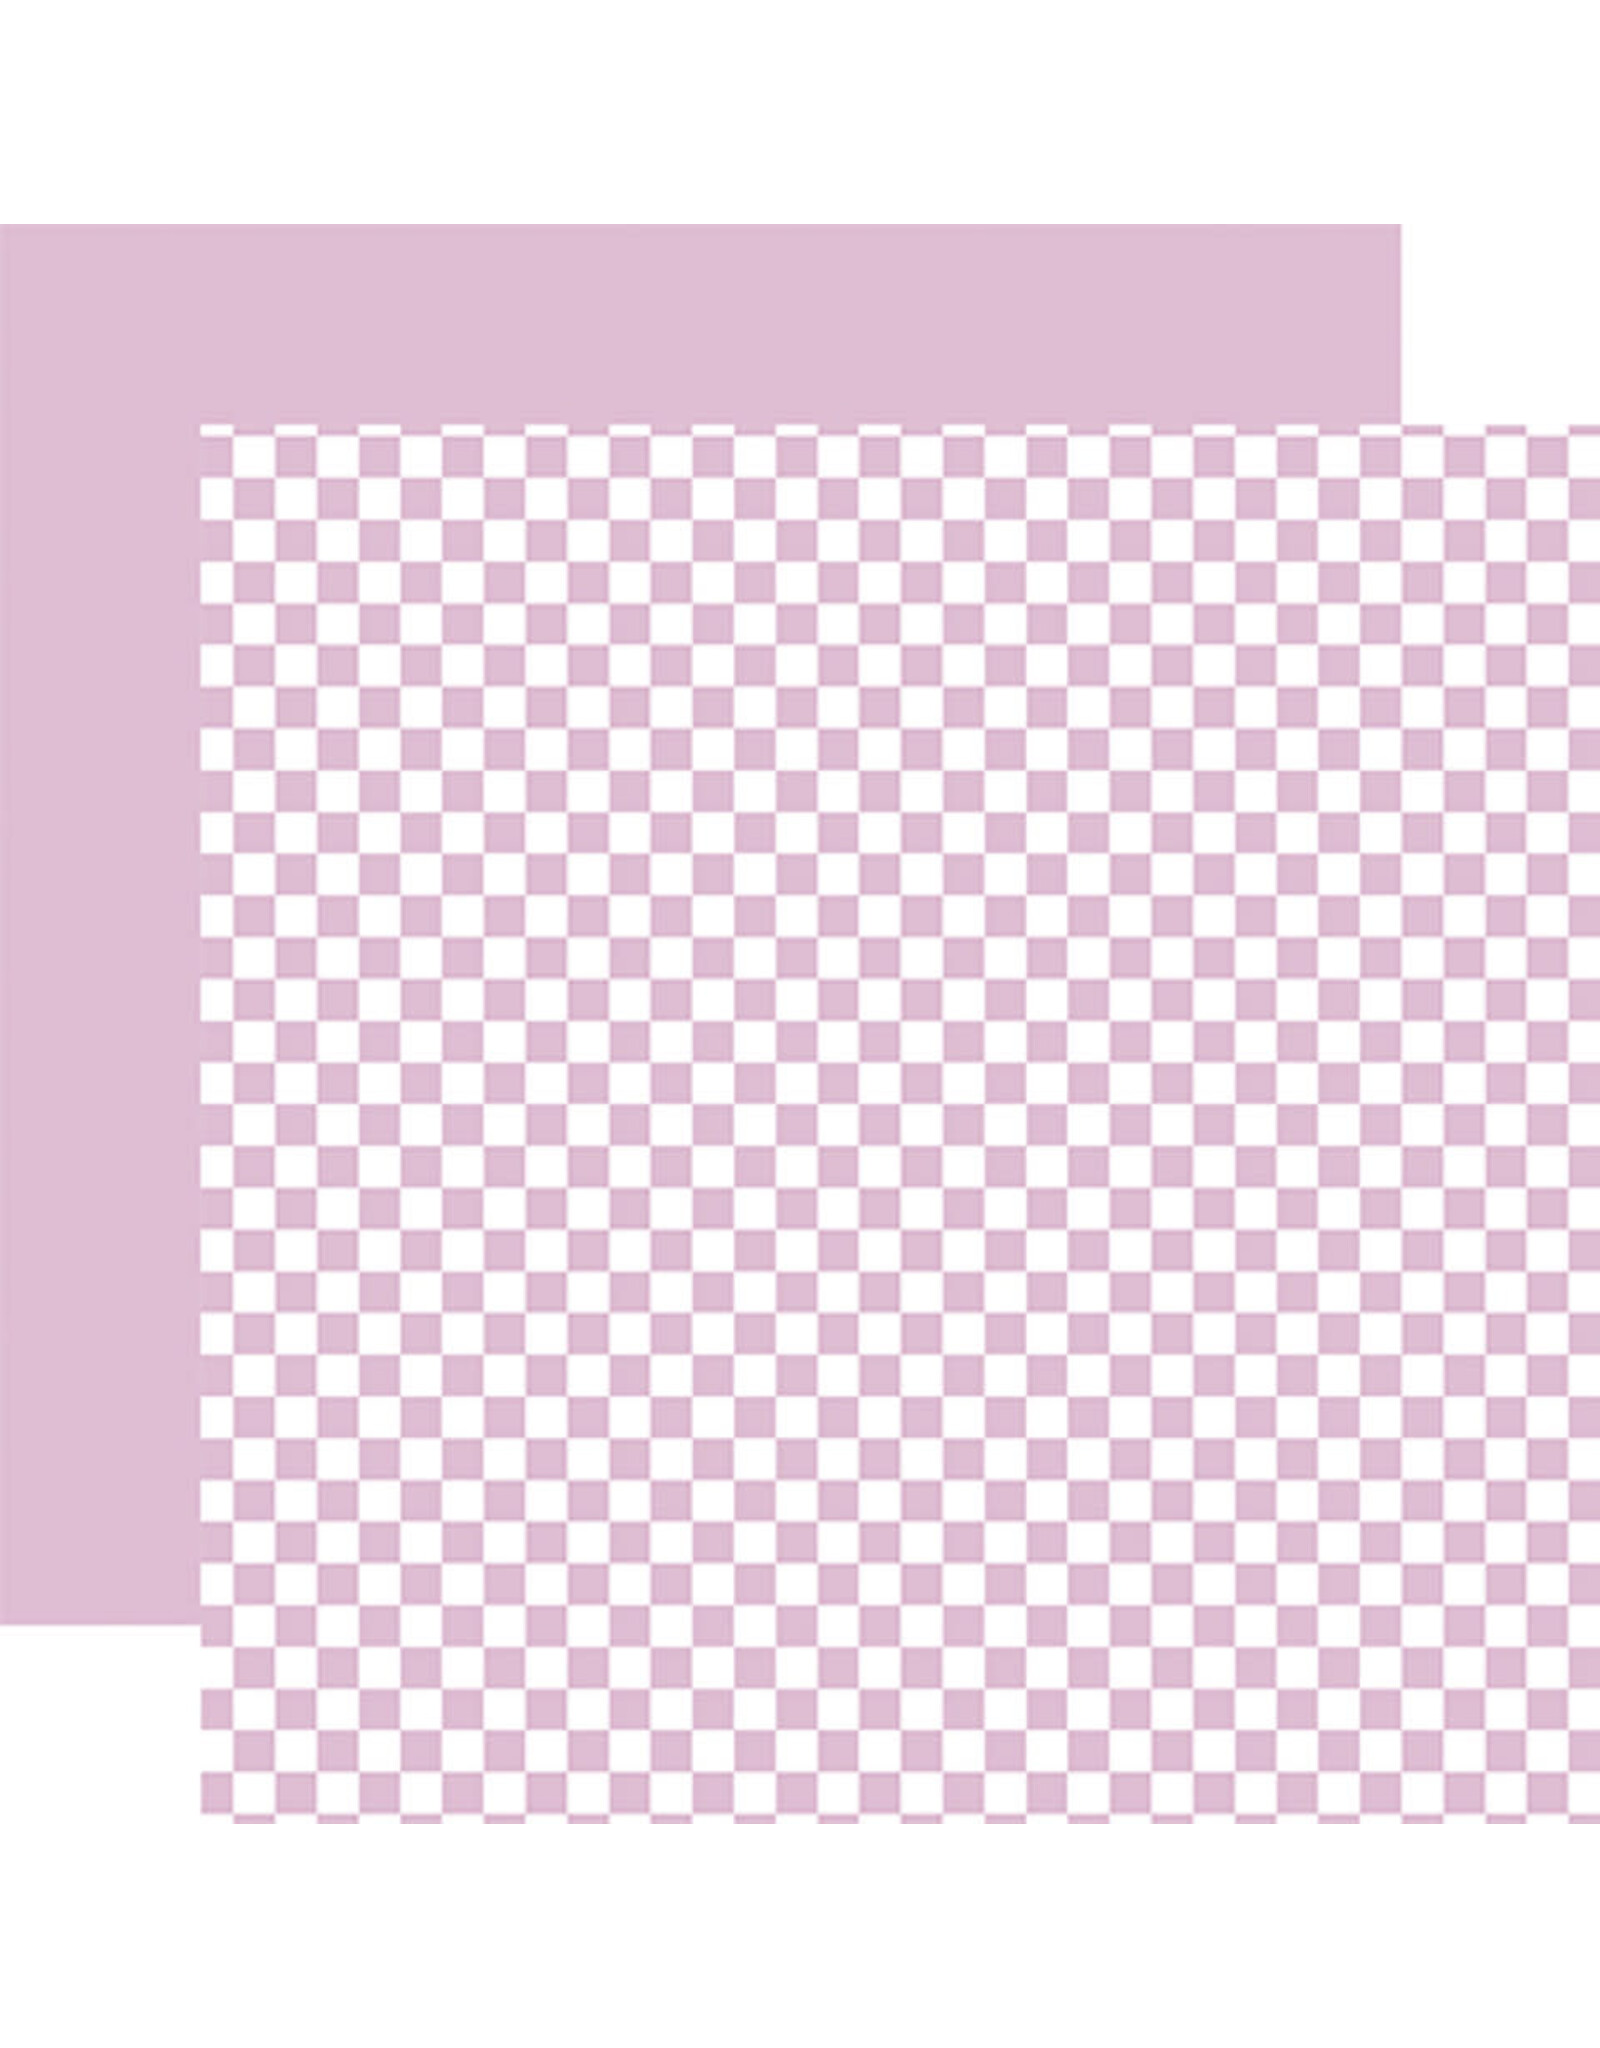 Echo Park Checkerboard:  Lavender 12x12 Patterned Paper